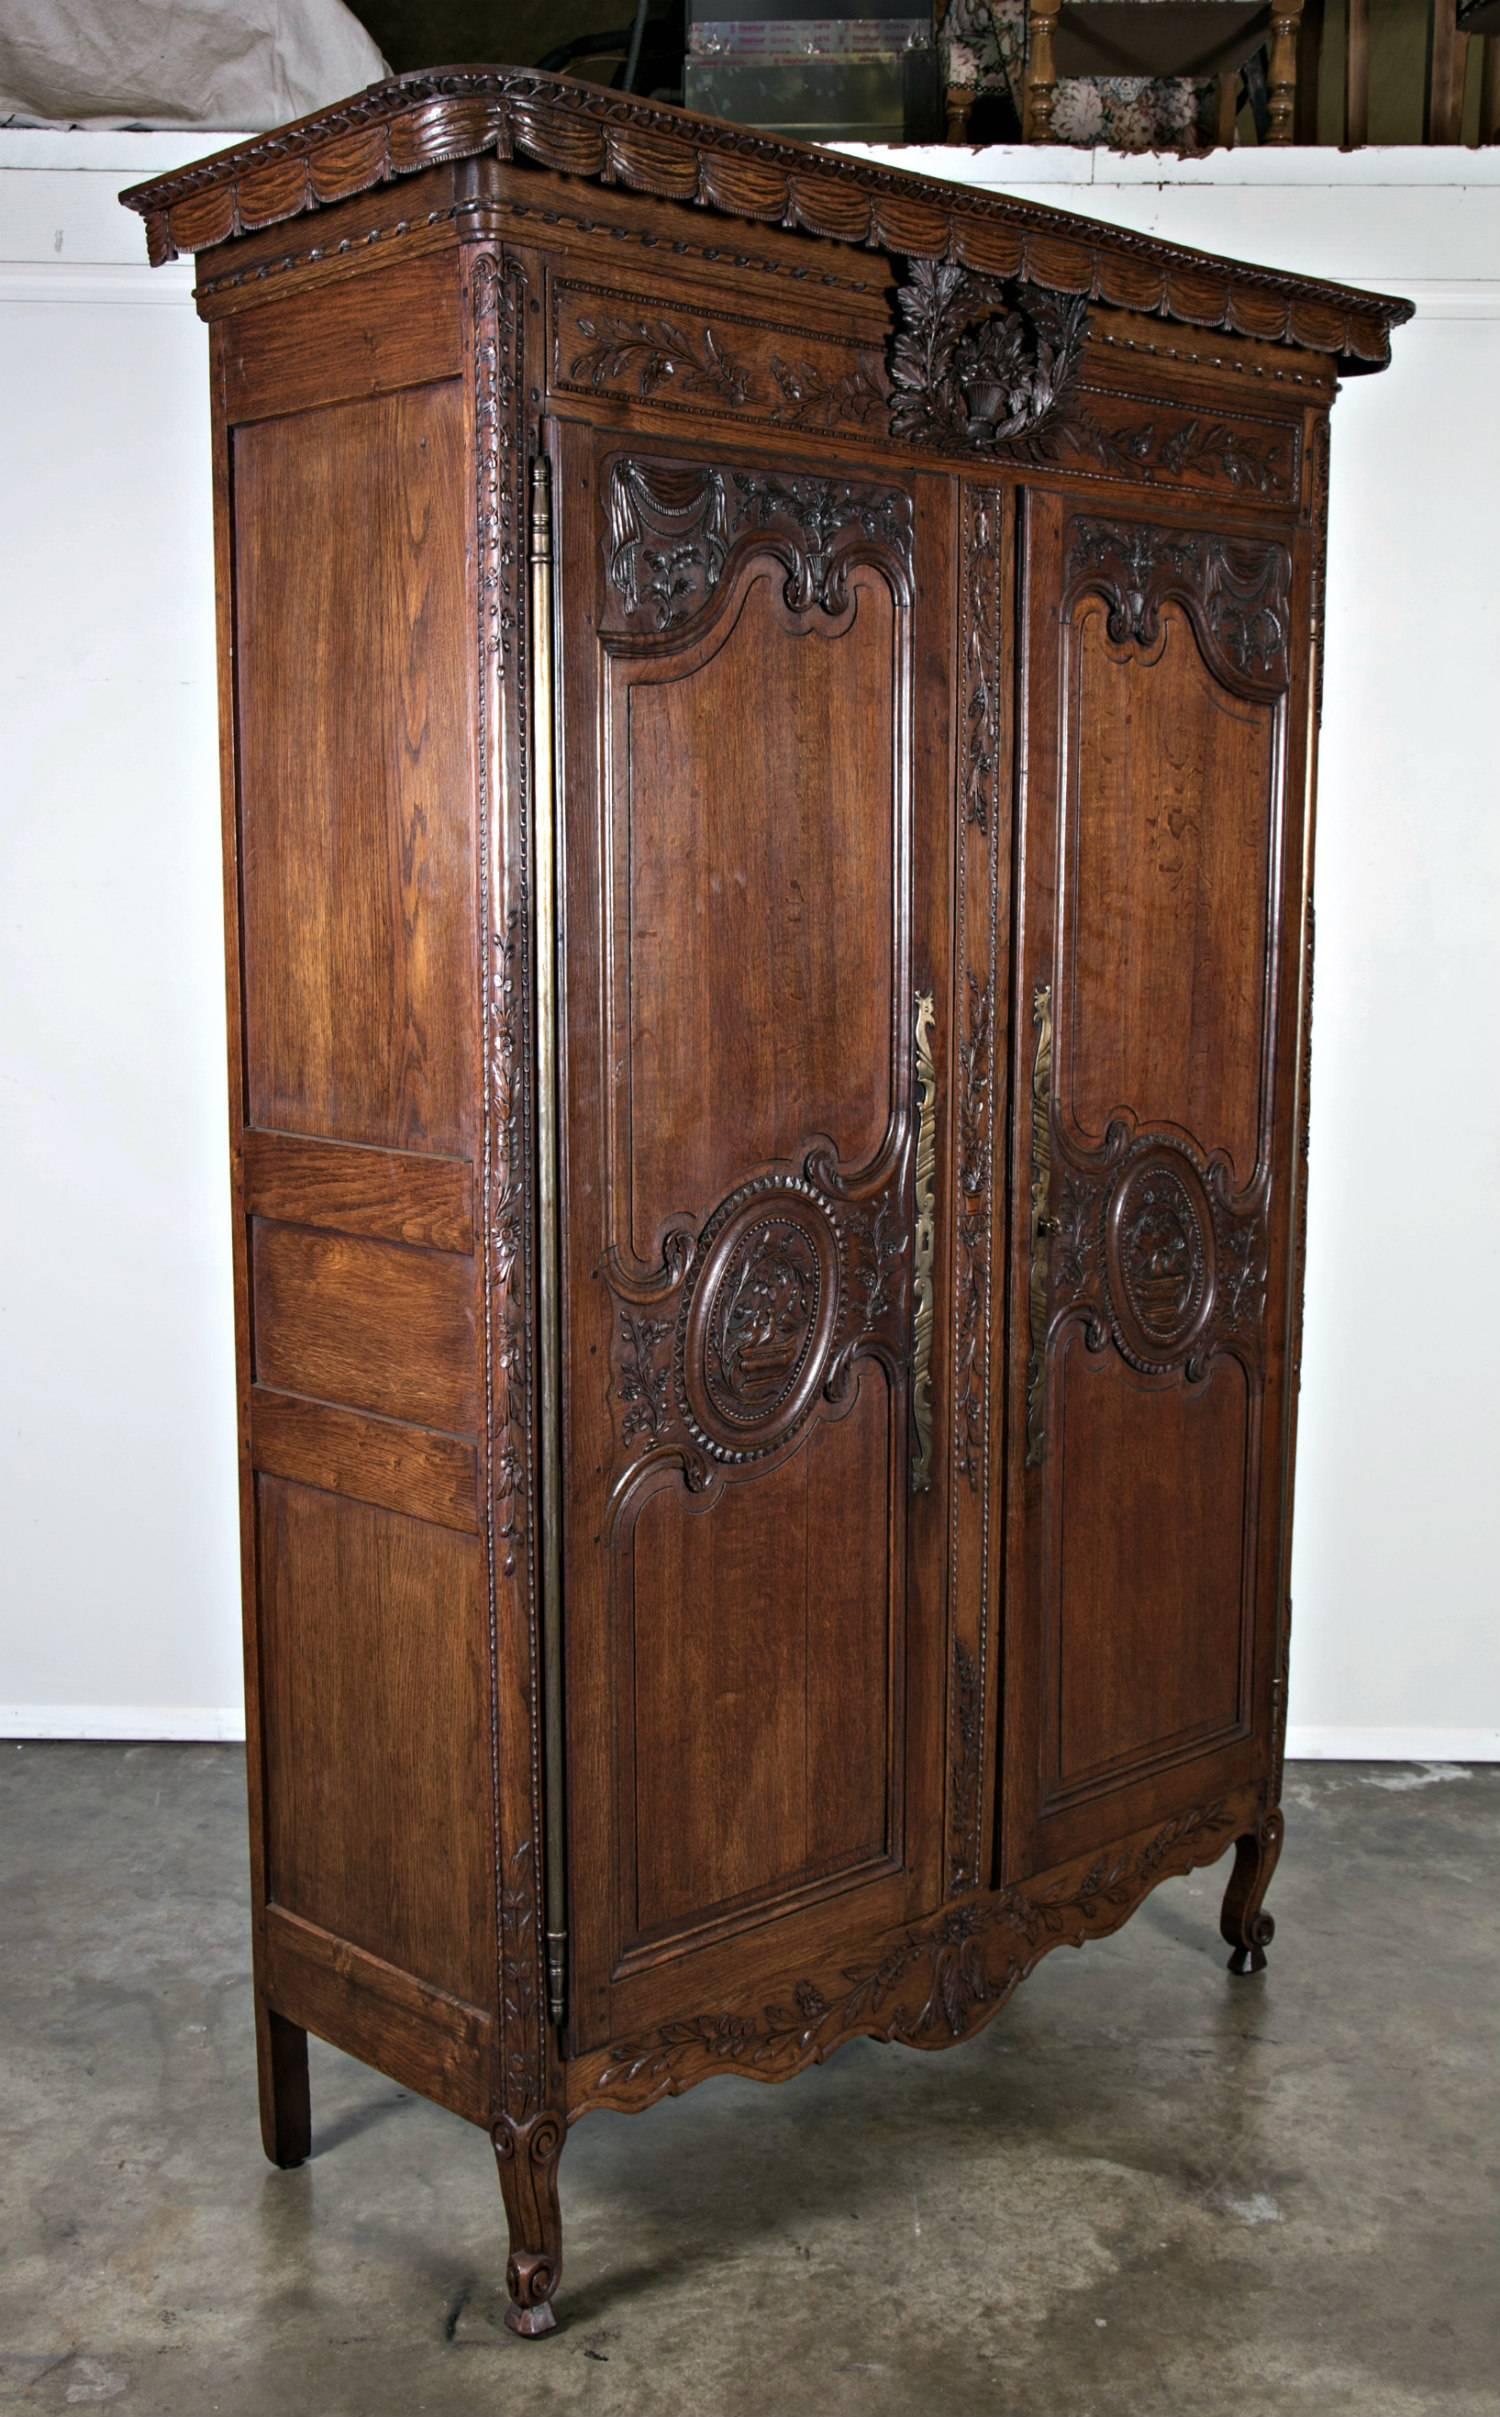 Antique French Louis XV style solid oak marriage armoire having a rare hand-carved drapery crown above a frieze that features a basket of flowers. Paneled doors highlighted with floral and foliate carvings above a scrolled and accented apron. Raised